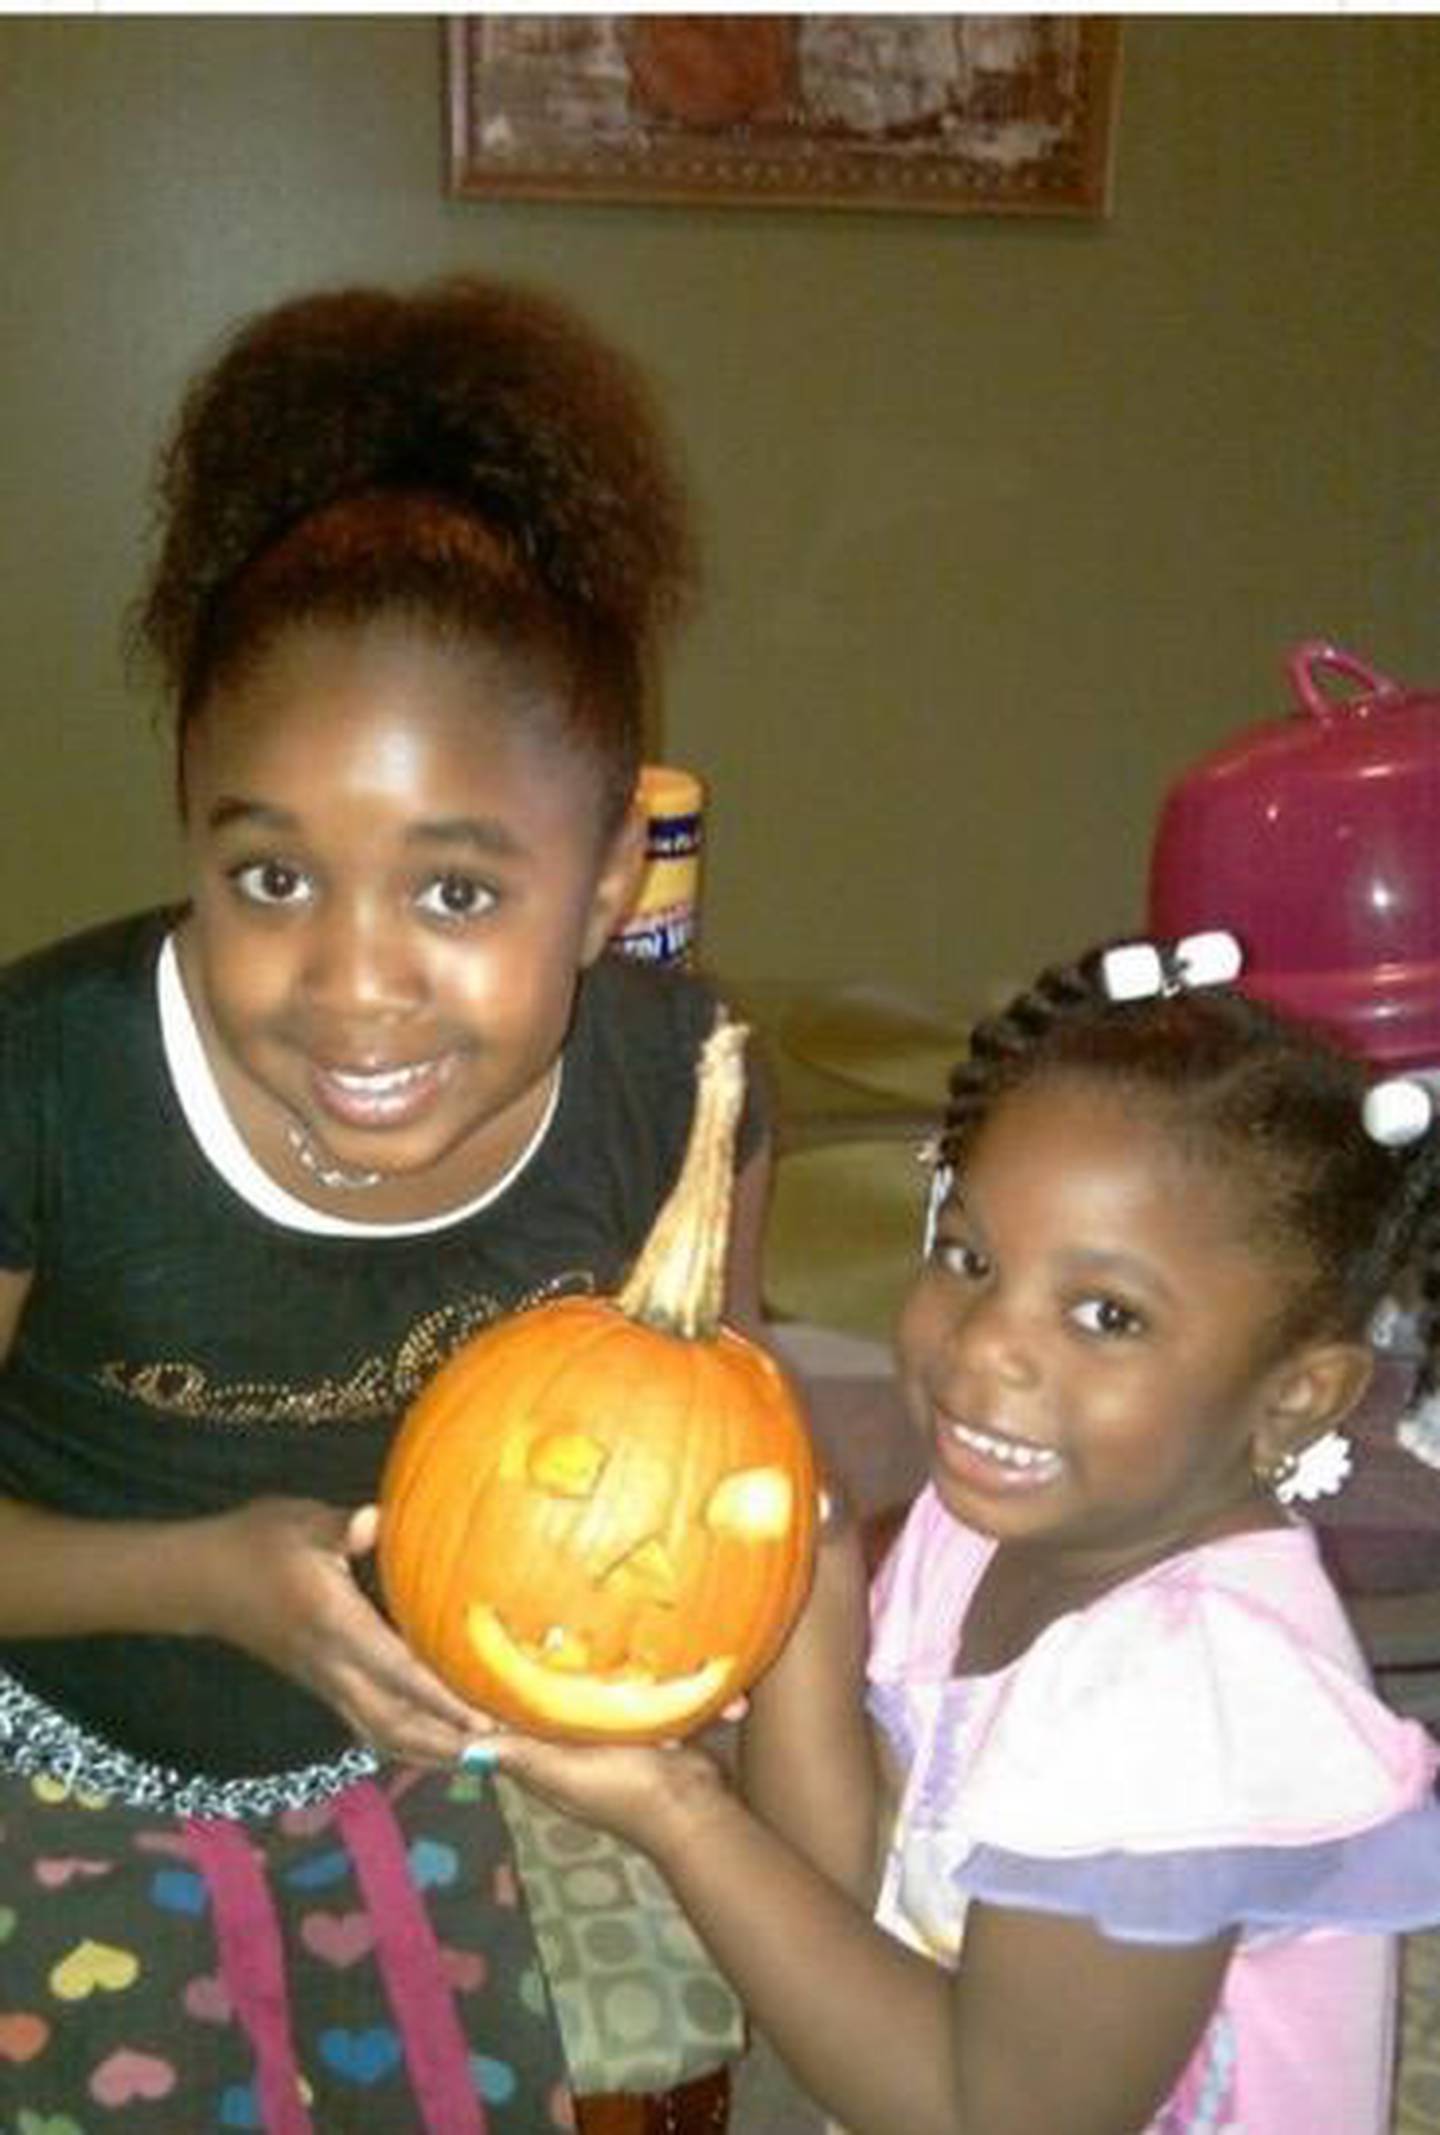 Dykota Morgan, 15, of Bolingbrook was an athlete, artist, activist and scholar. She died of complications from COVID-19 on May 4. She is pictured in her younger years with her older sister Dyman.